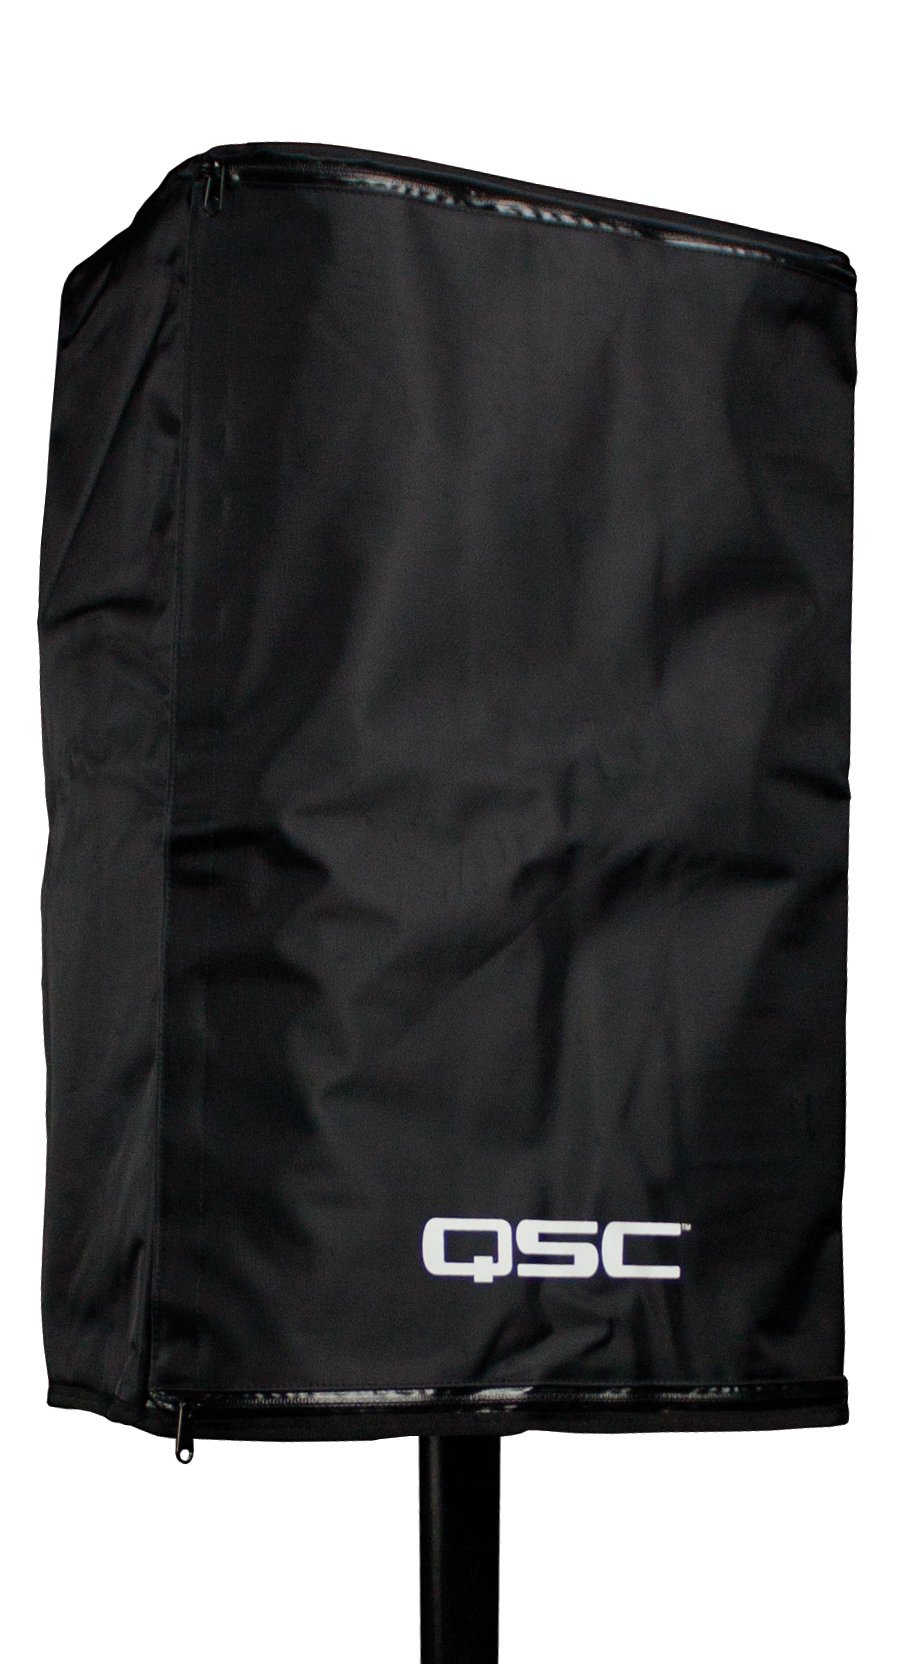 QSC K12 OUTDOOR COVER